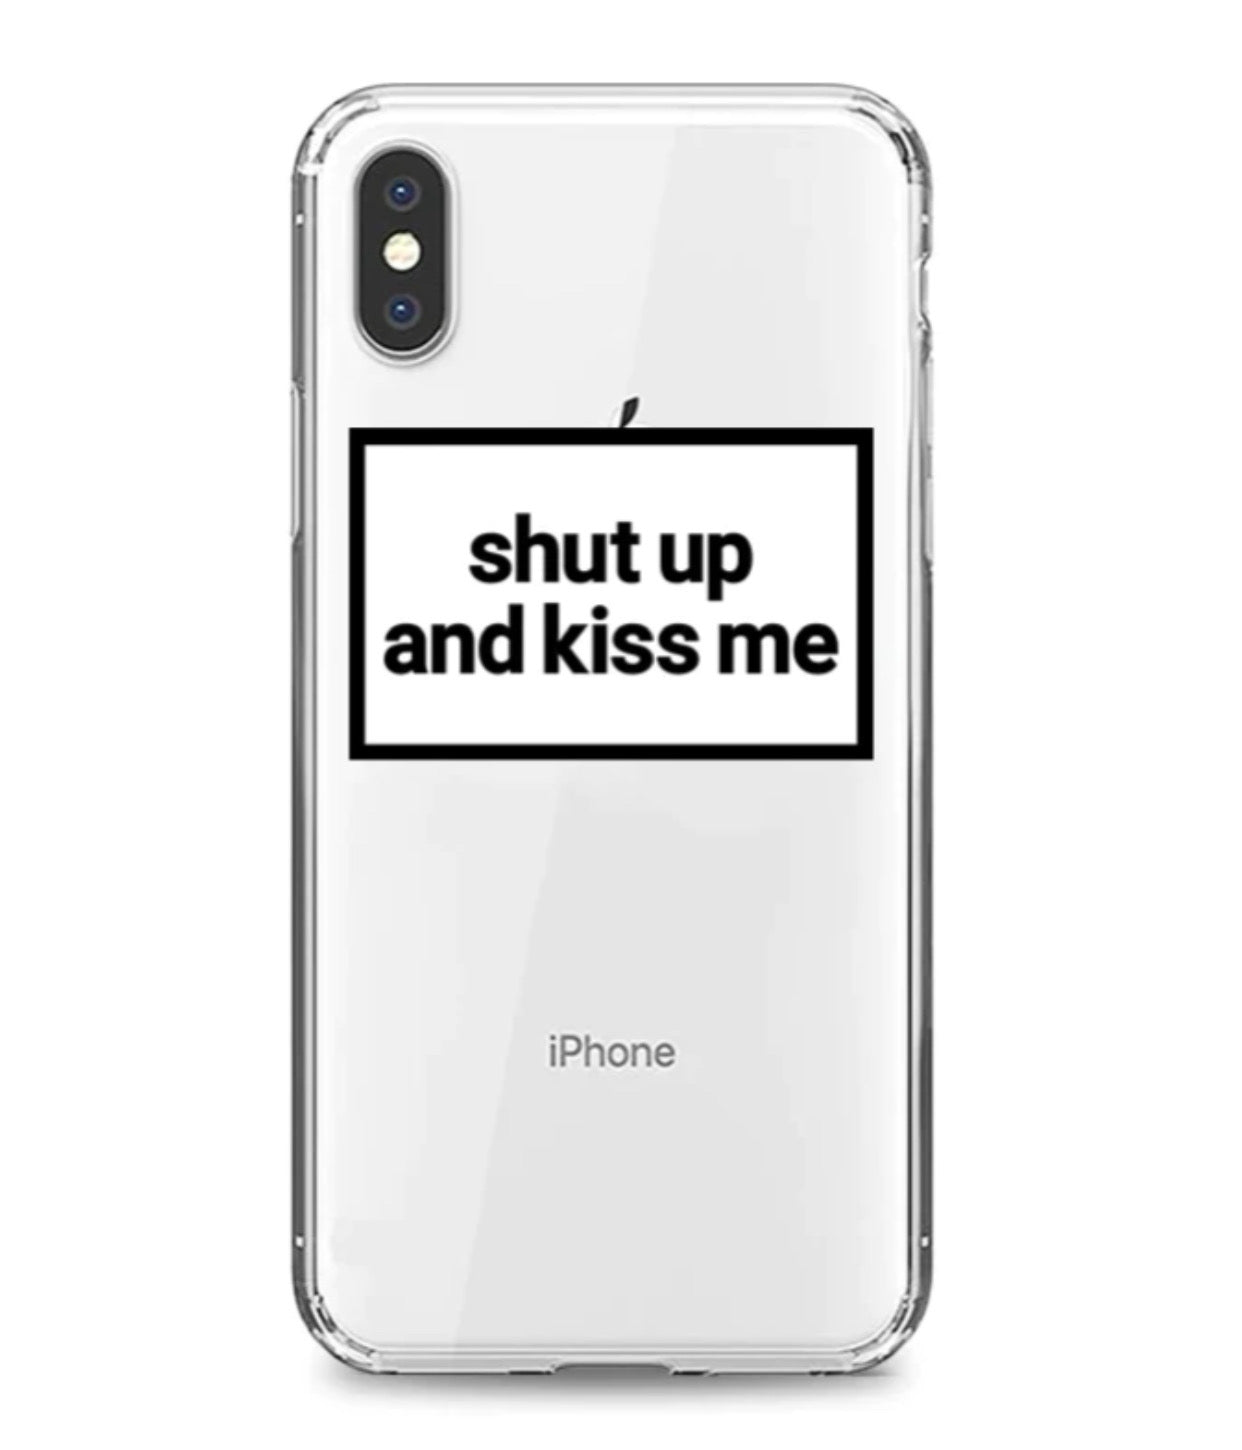 " shut up and kiss me " case